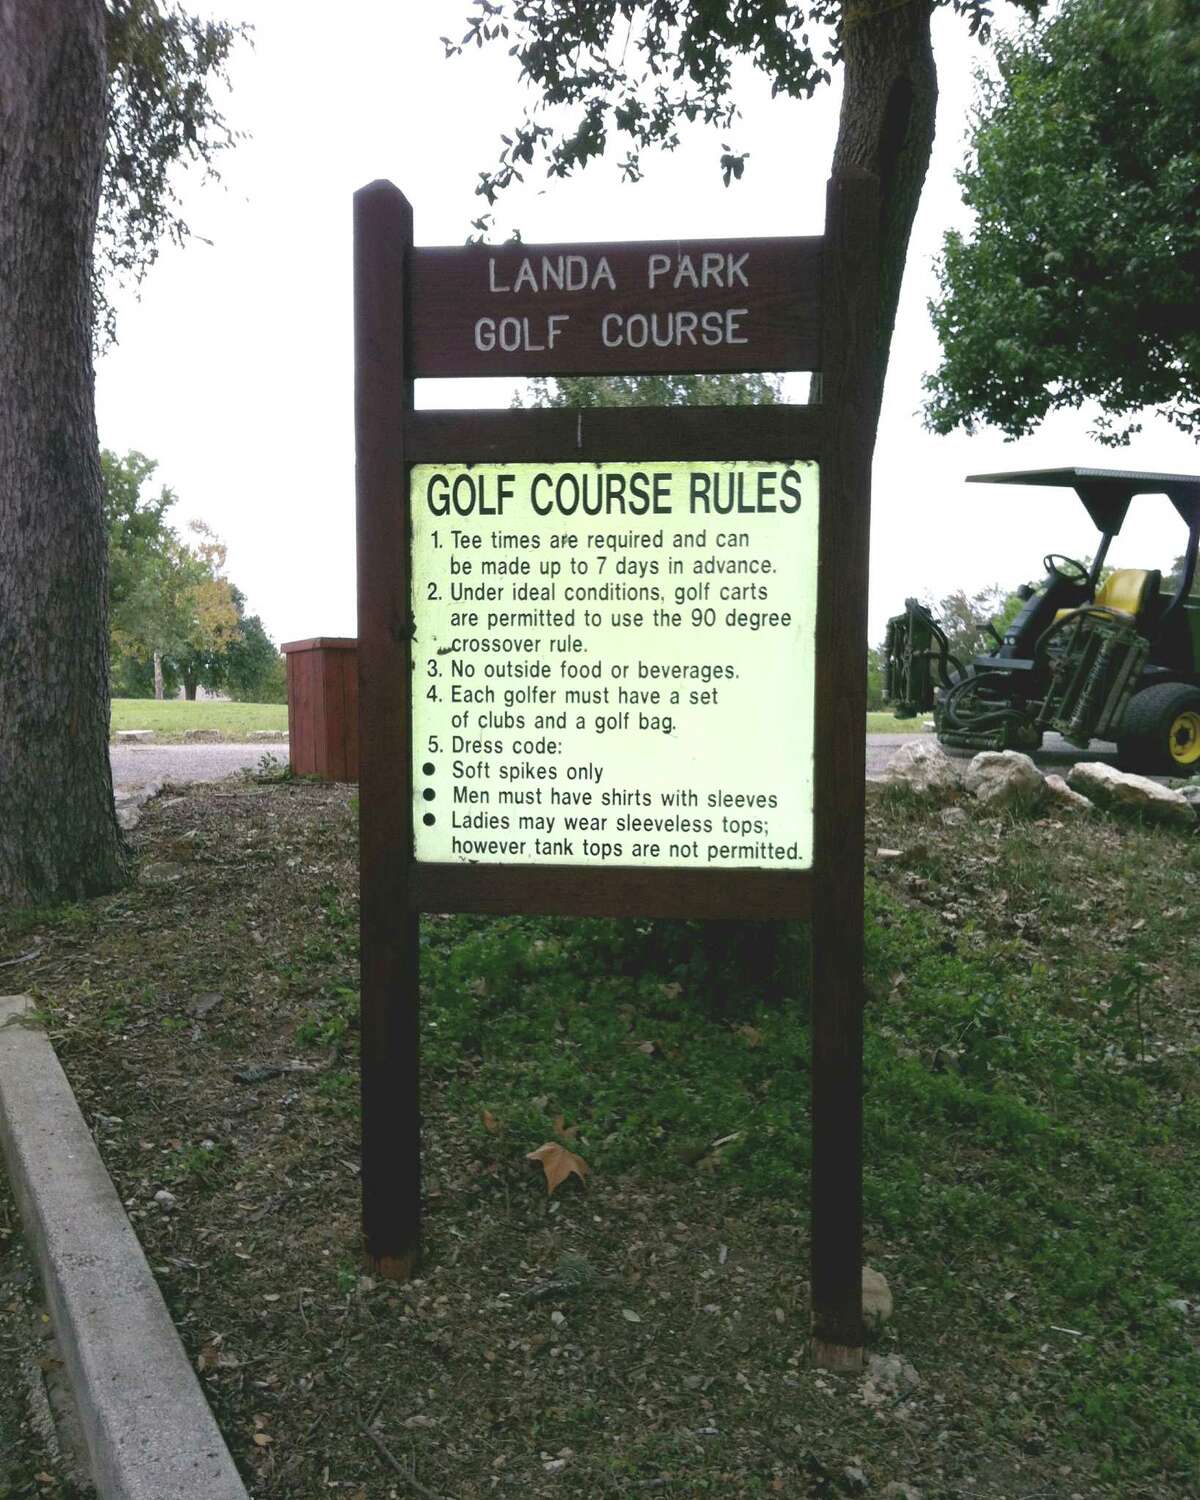 Don't forget to arrange for tee times when planning an outing at Landa Park Golf Course in New Braunfels.